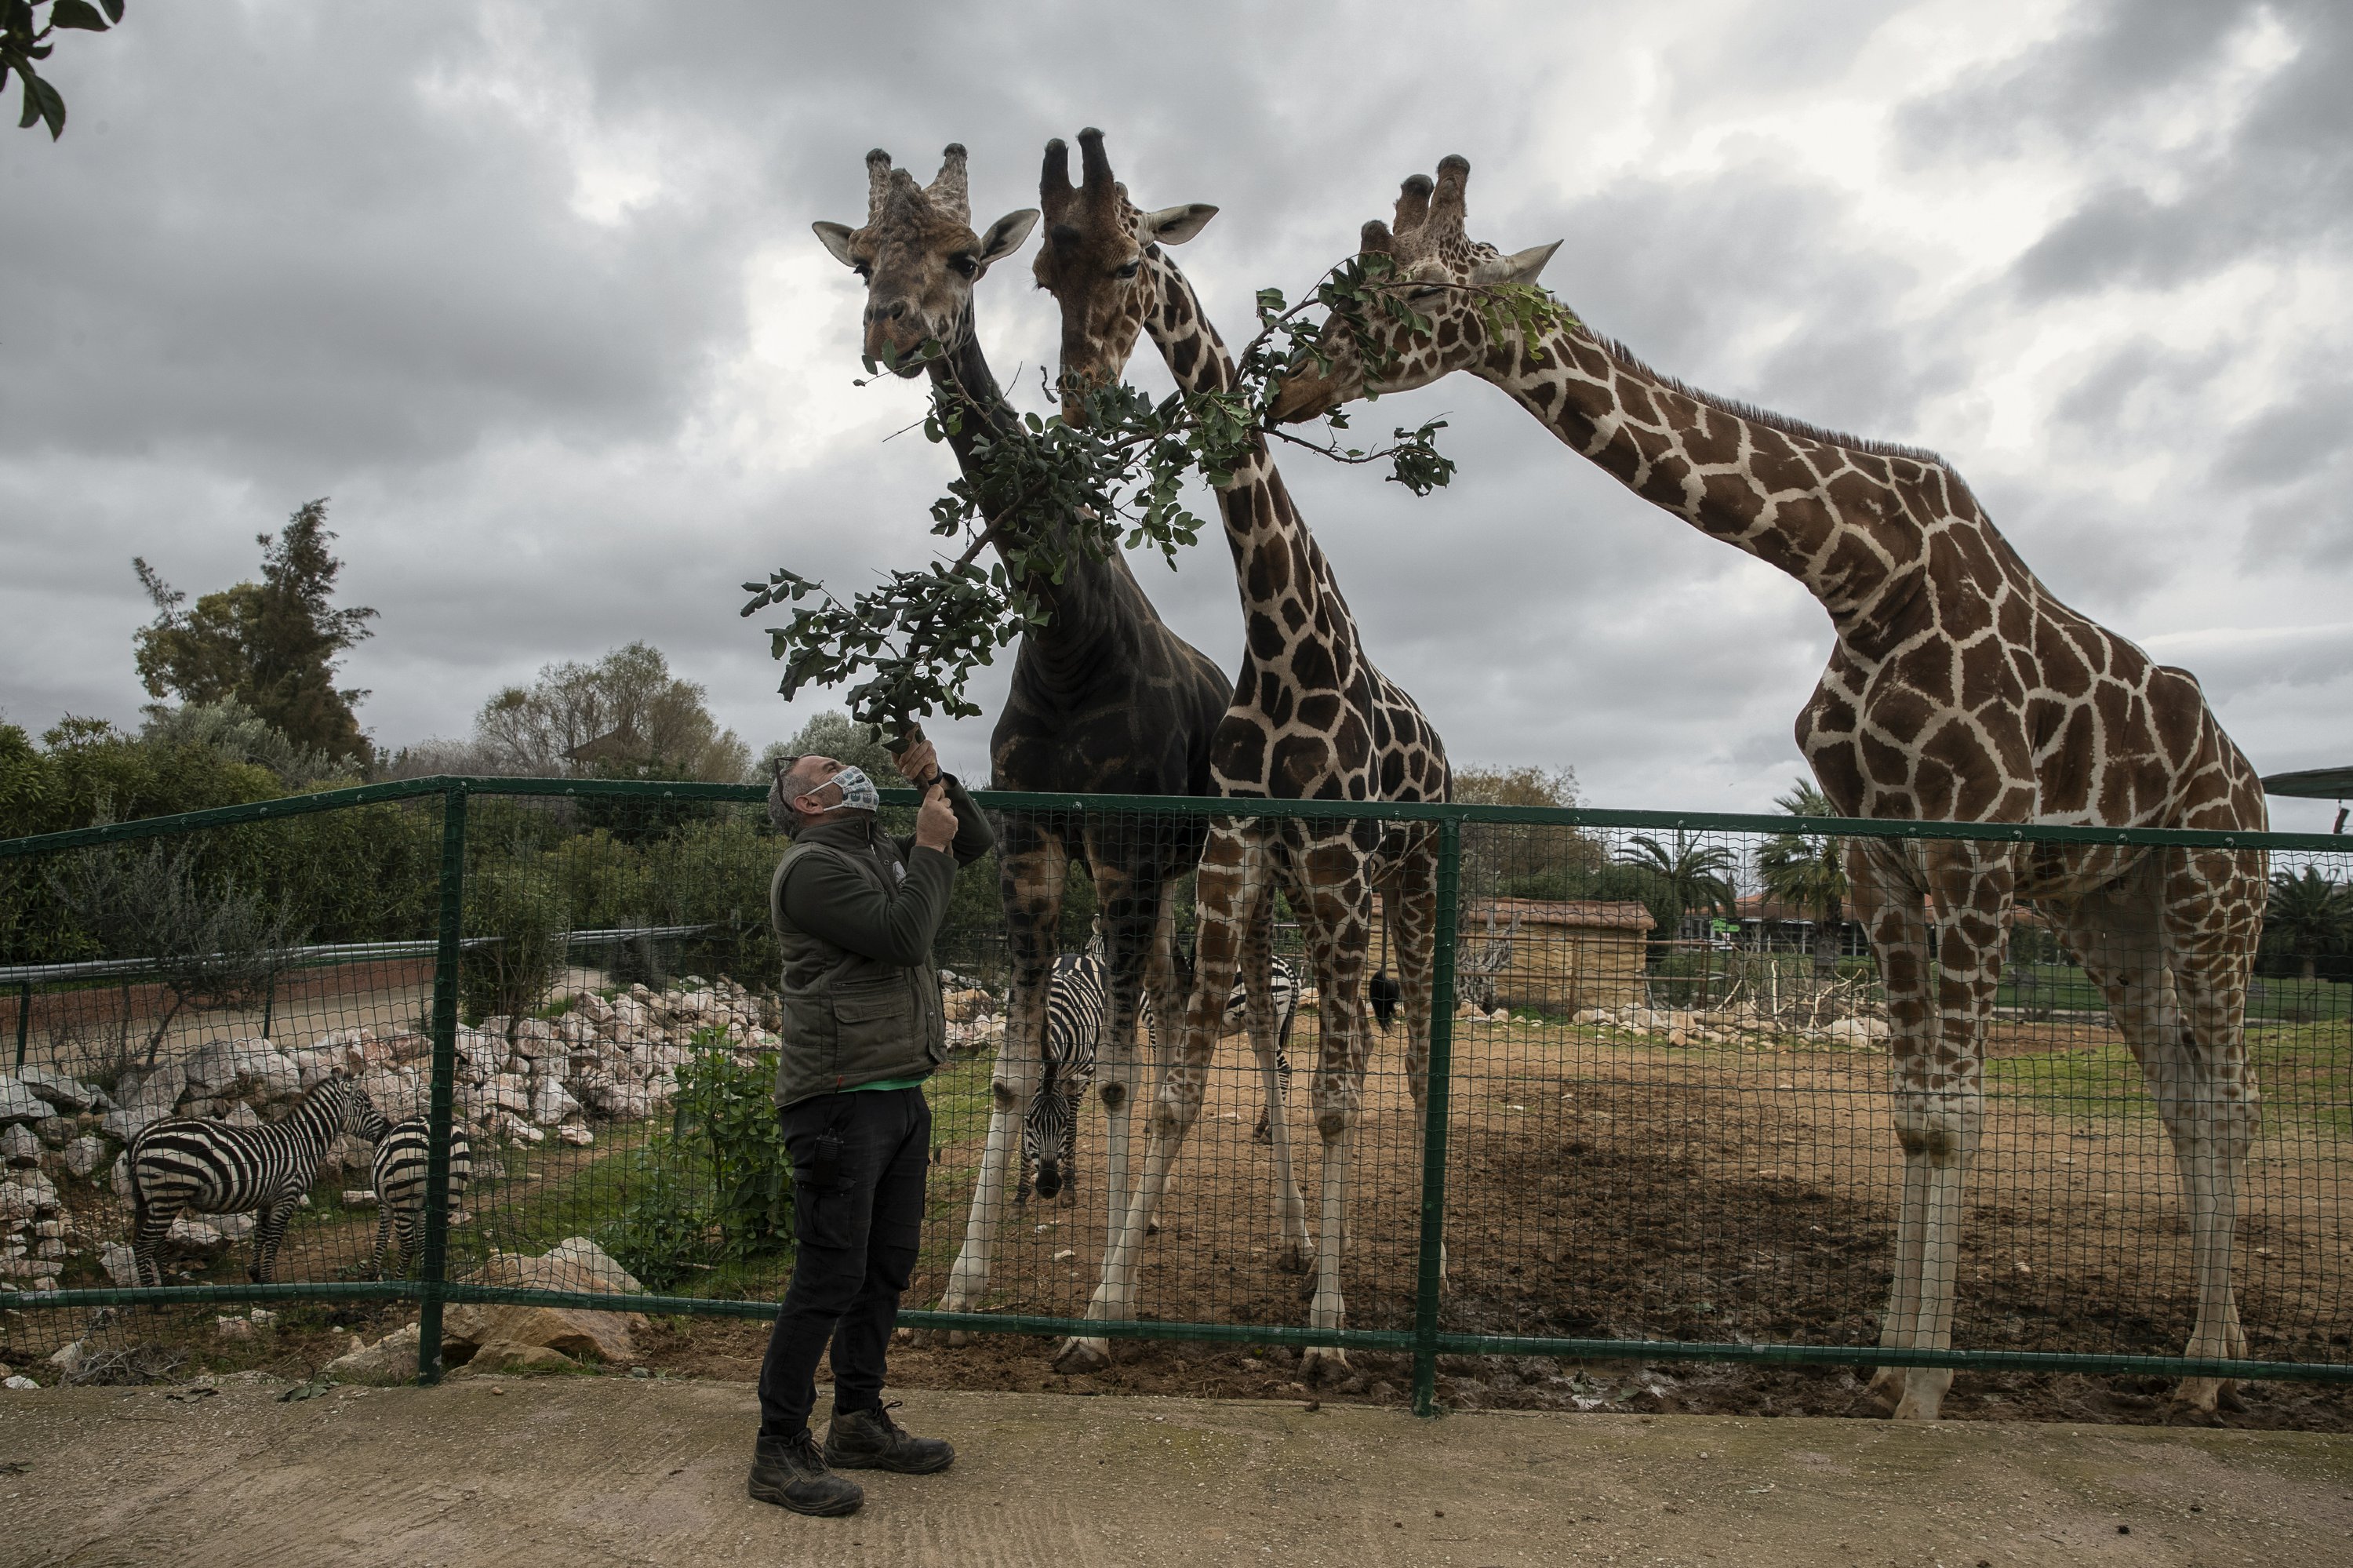 No income, 2,000 mouths to feed: Lockdown squeezes Greek zoo